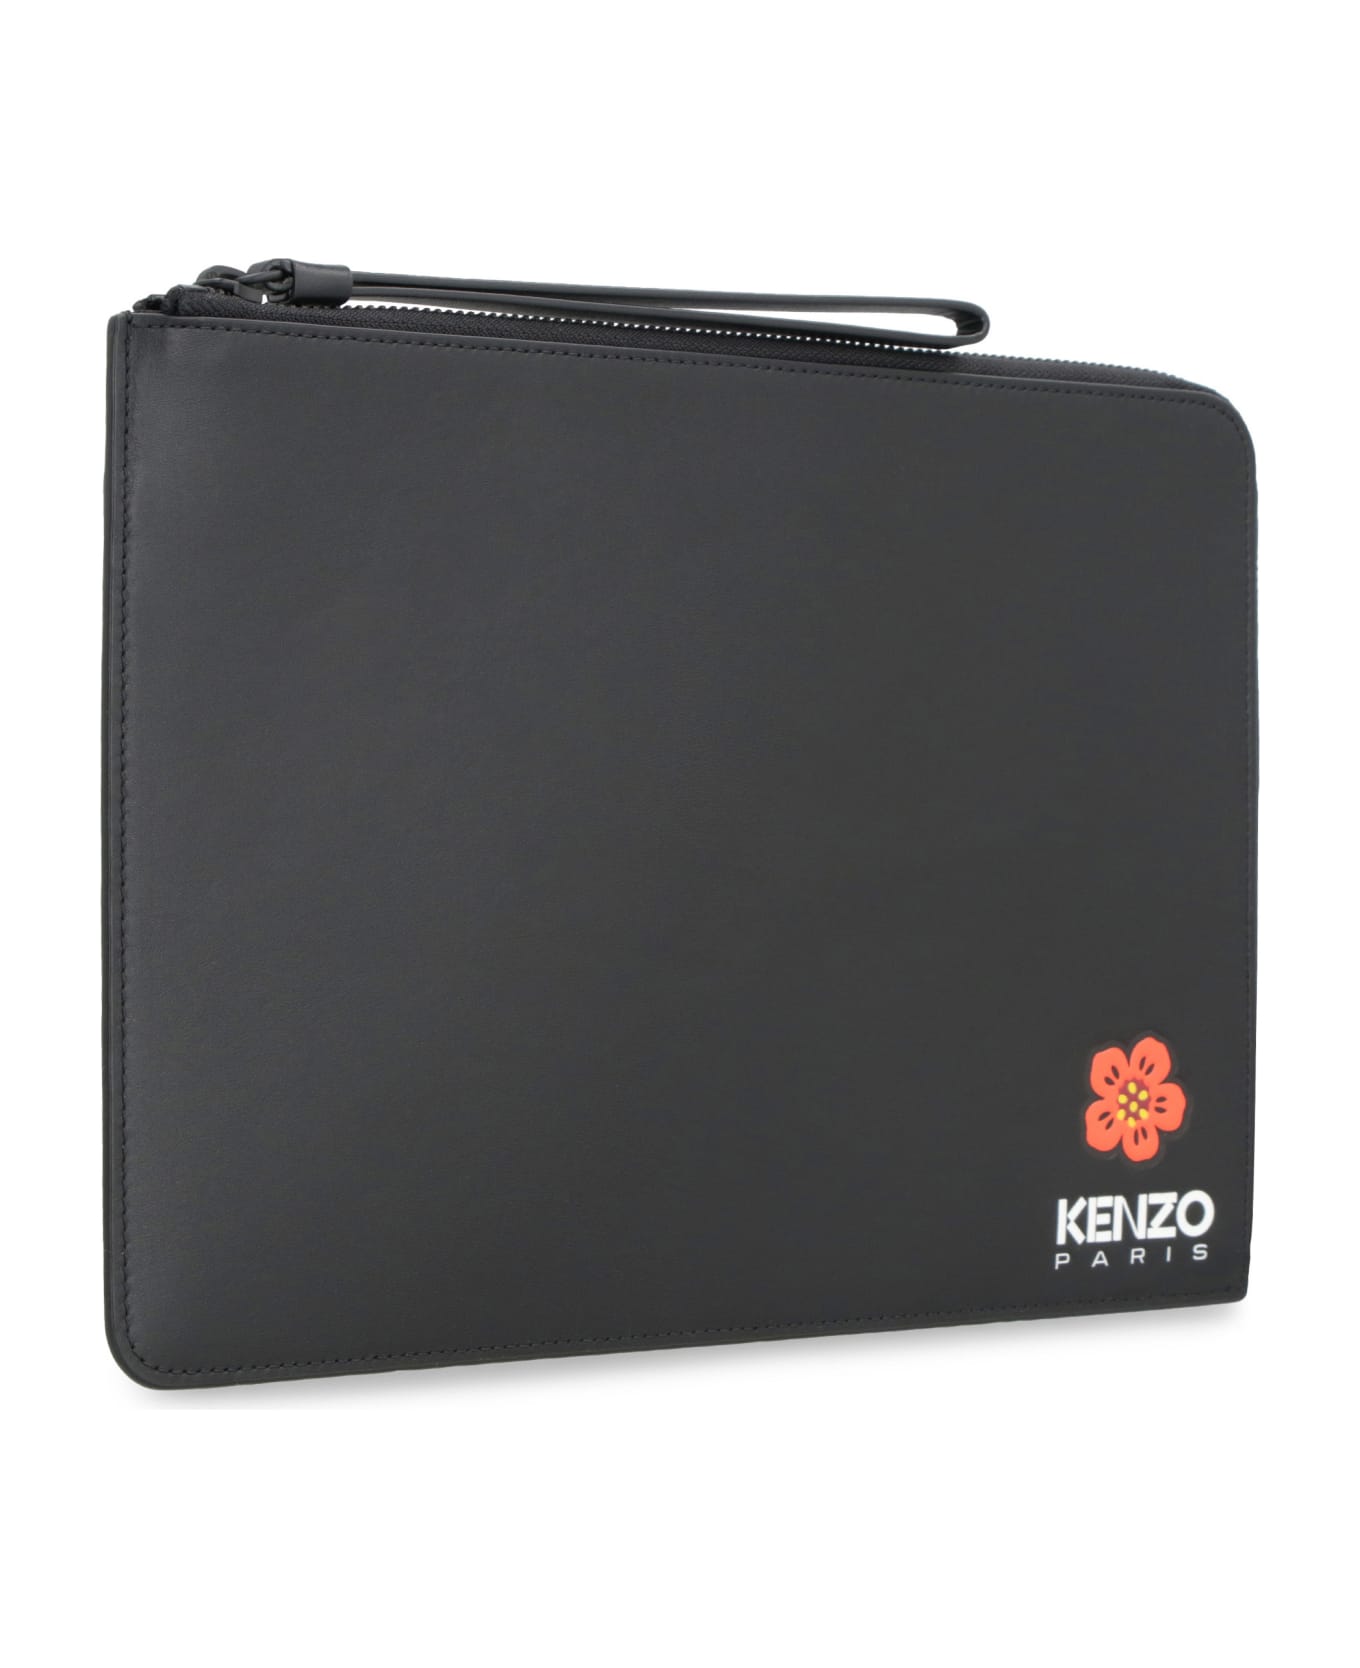 Kenzo Leather Flat Pouch - black